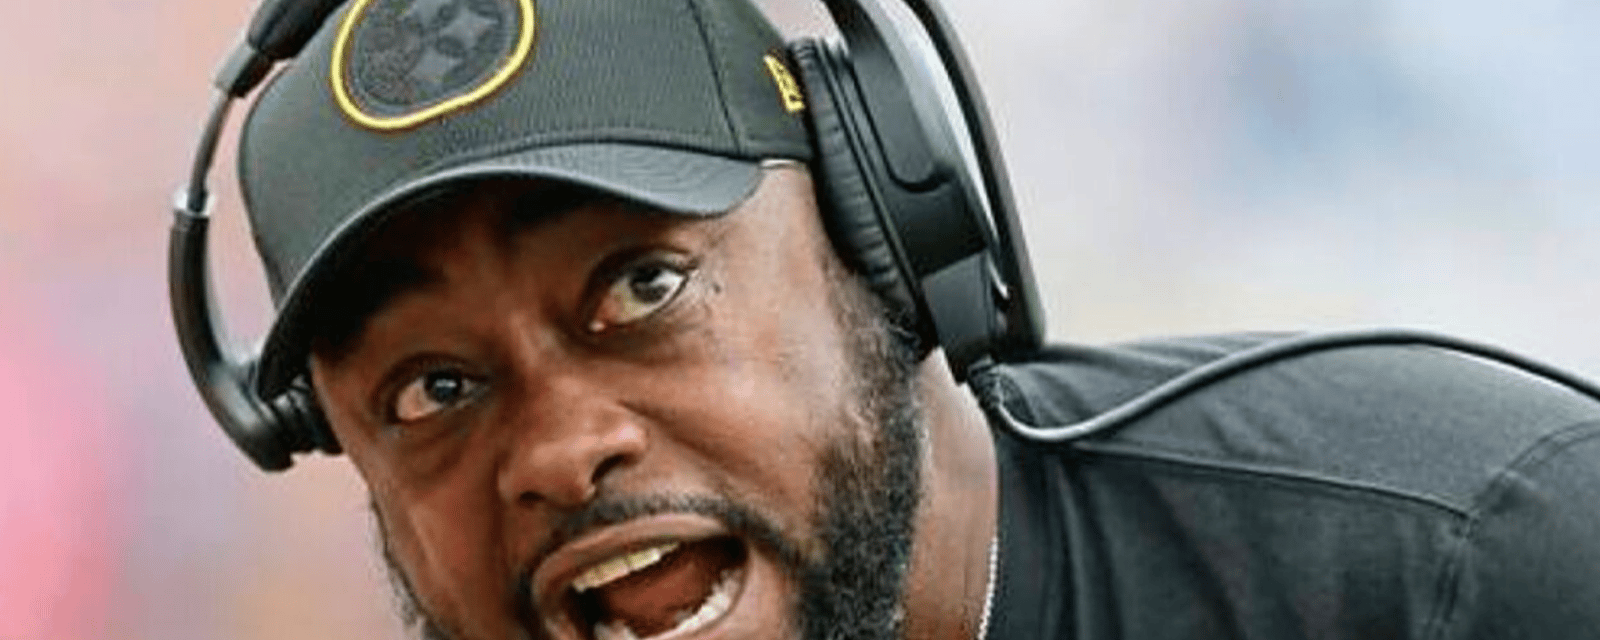 Mike Tomlin confirms the Steelers wanted some goons” 